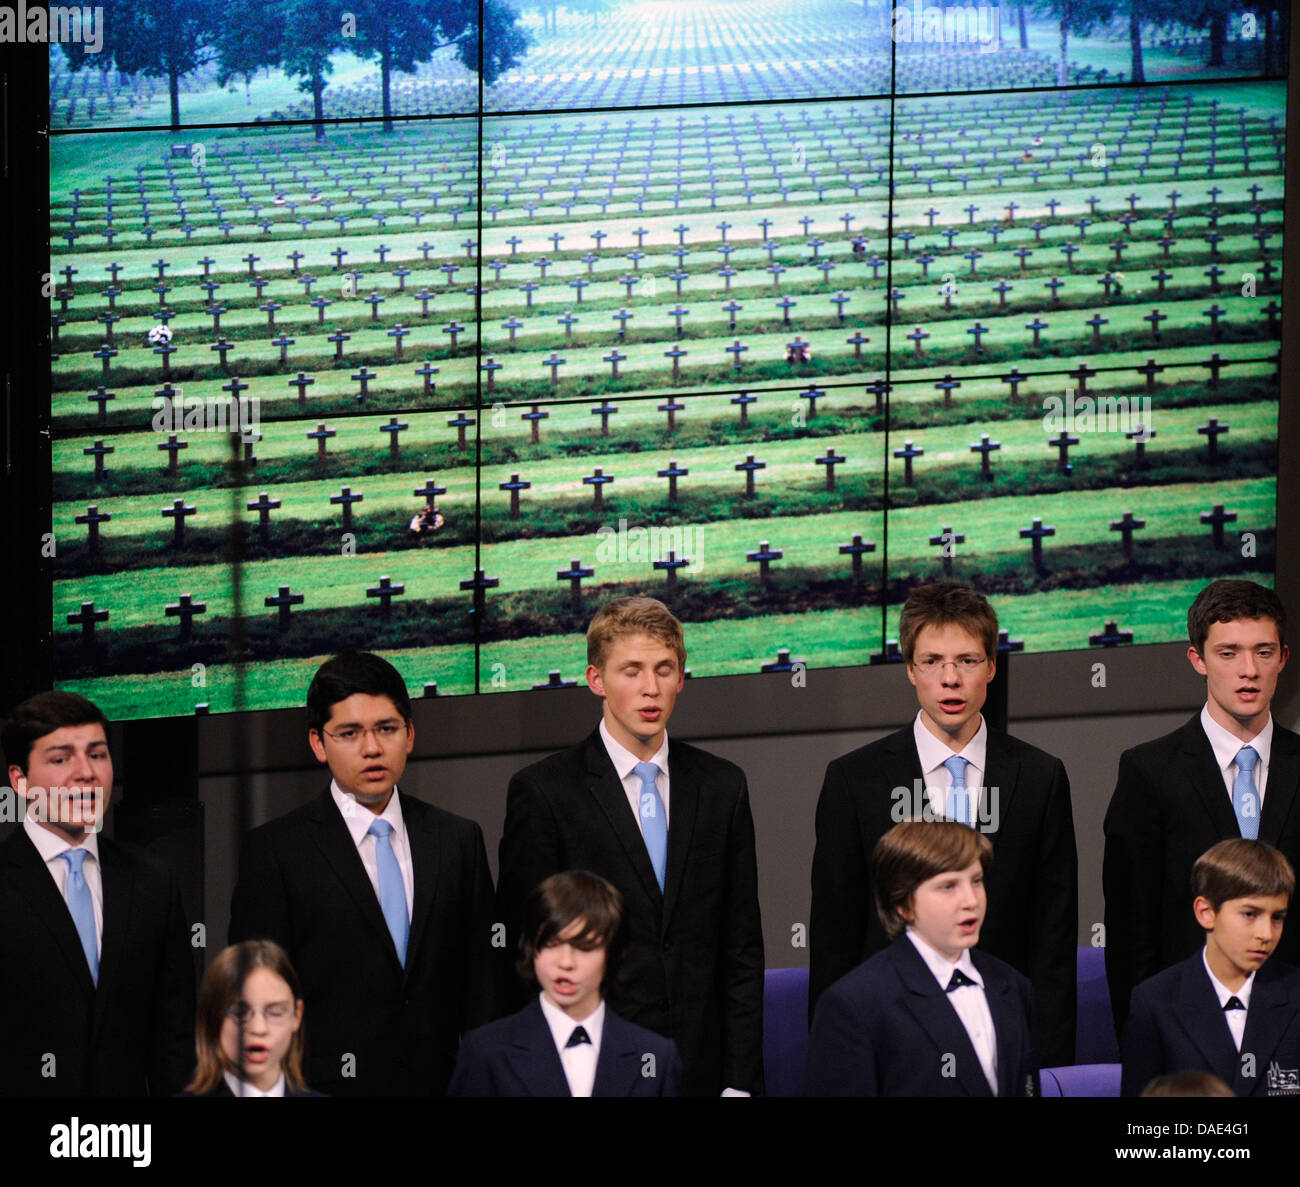 The Regensburg cathedral choir performs in front of a video wall showing a soldier's cemetry at the Reichstag in Berlin, Germany, 13 November 2011. The event took place on the occassion of the Remembrance Day, a memorial day observed since the end of World War I to remember the members of armed forces who have died in the line of duty. It is observed on 11 November to recall the of Stock Photo